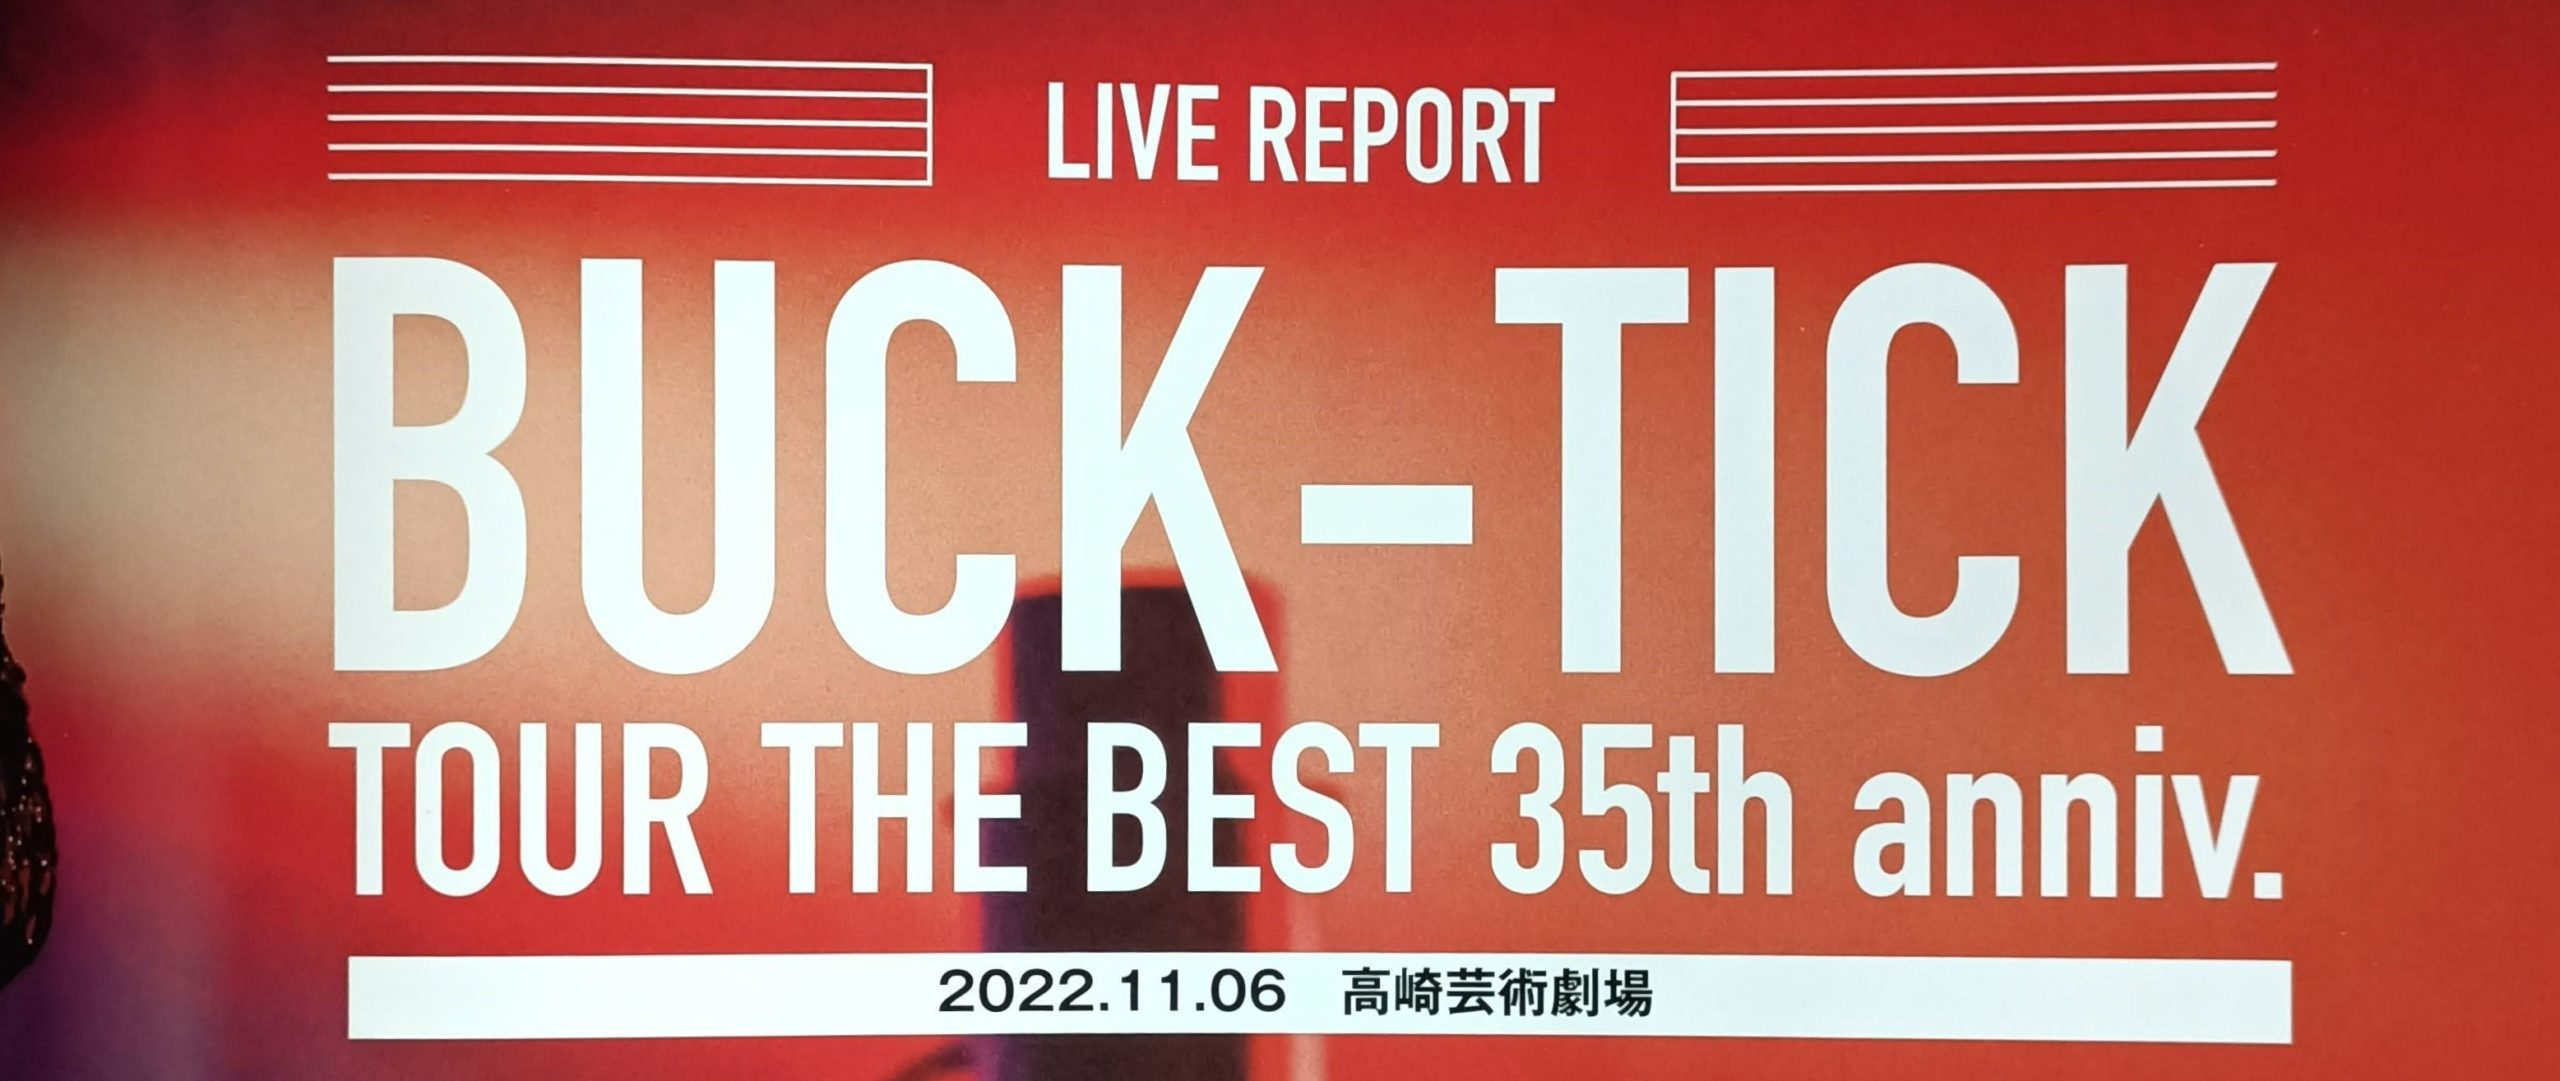 PHY Vol.23 — TOUR THE BEST 35th anniv. Report | BUCK-TICK